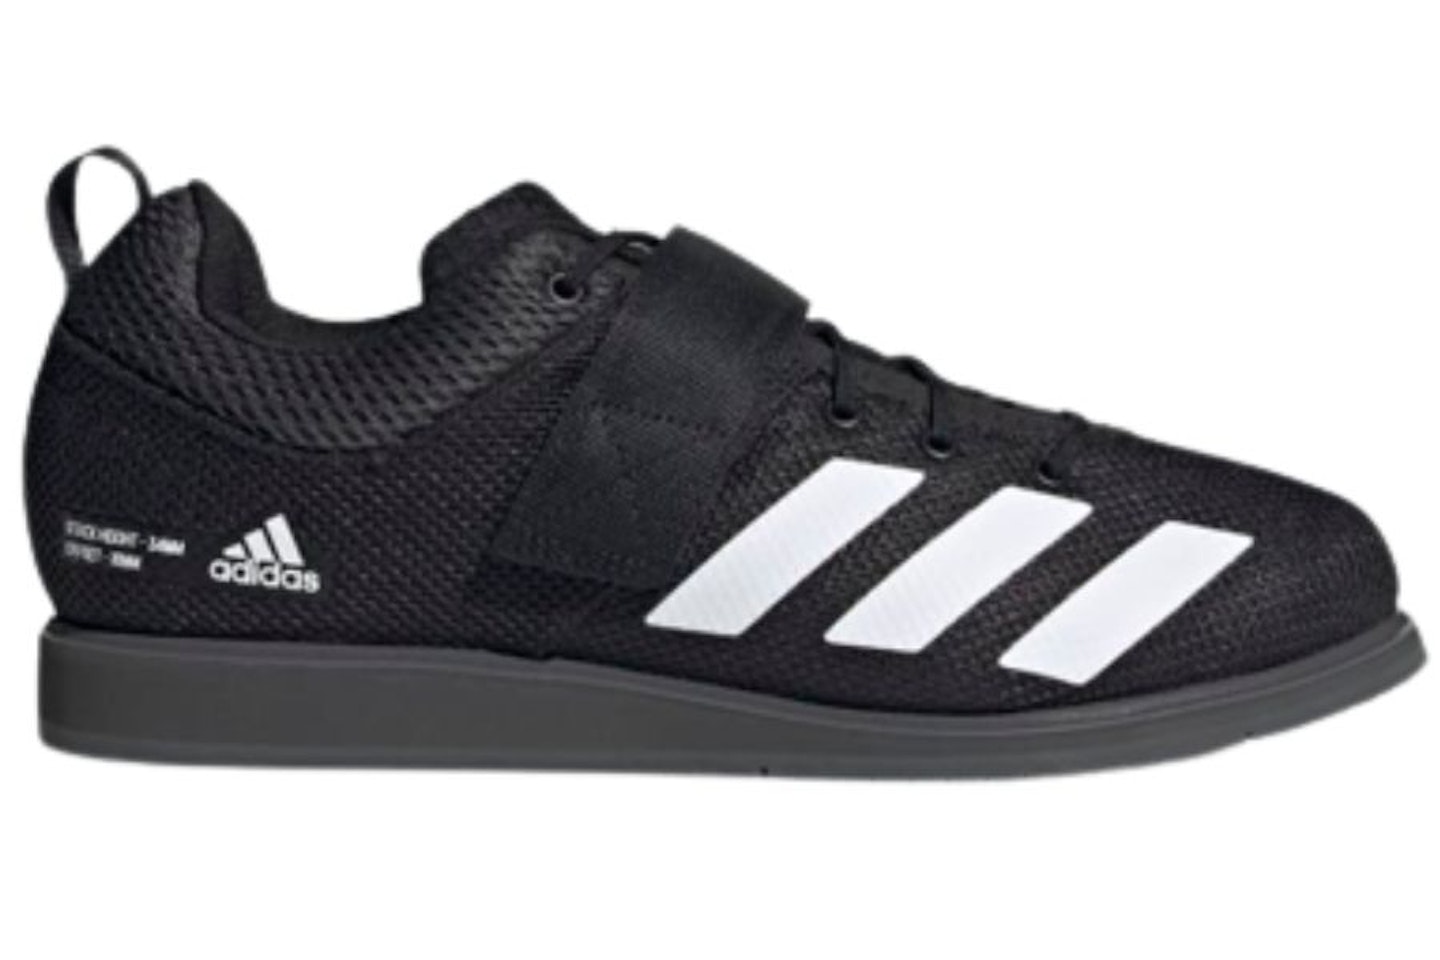 Adidas Powerlift 5 Weightlifting Shoes